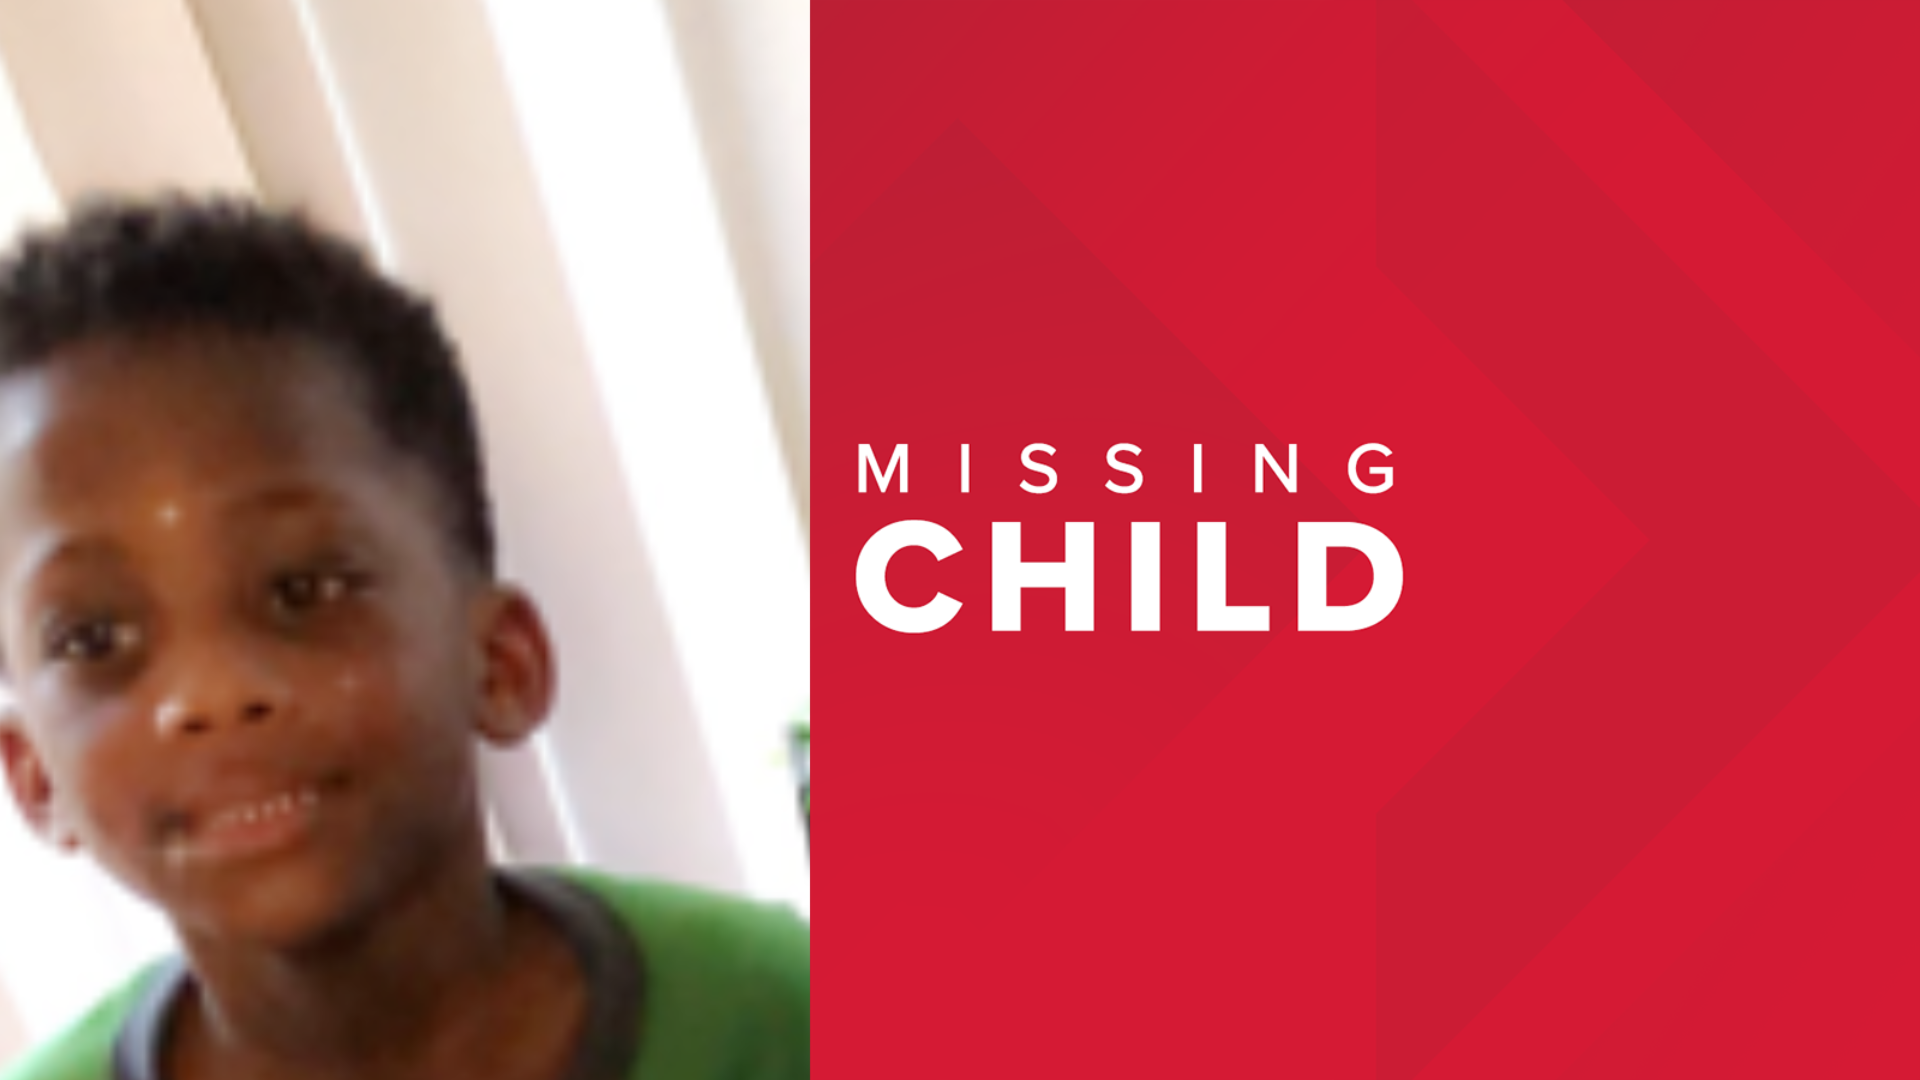 Zion Butler was wearing no shirt, rainbow-colored shorts, and water socks. He was at a pop-up tent with his family, celebrating the holiday when he went missing.